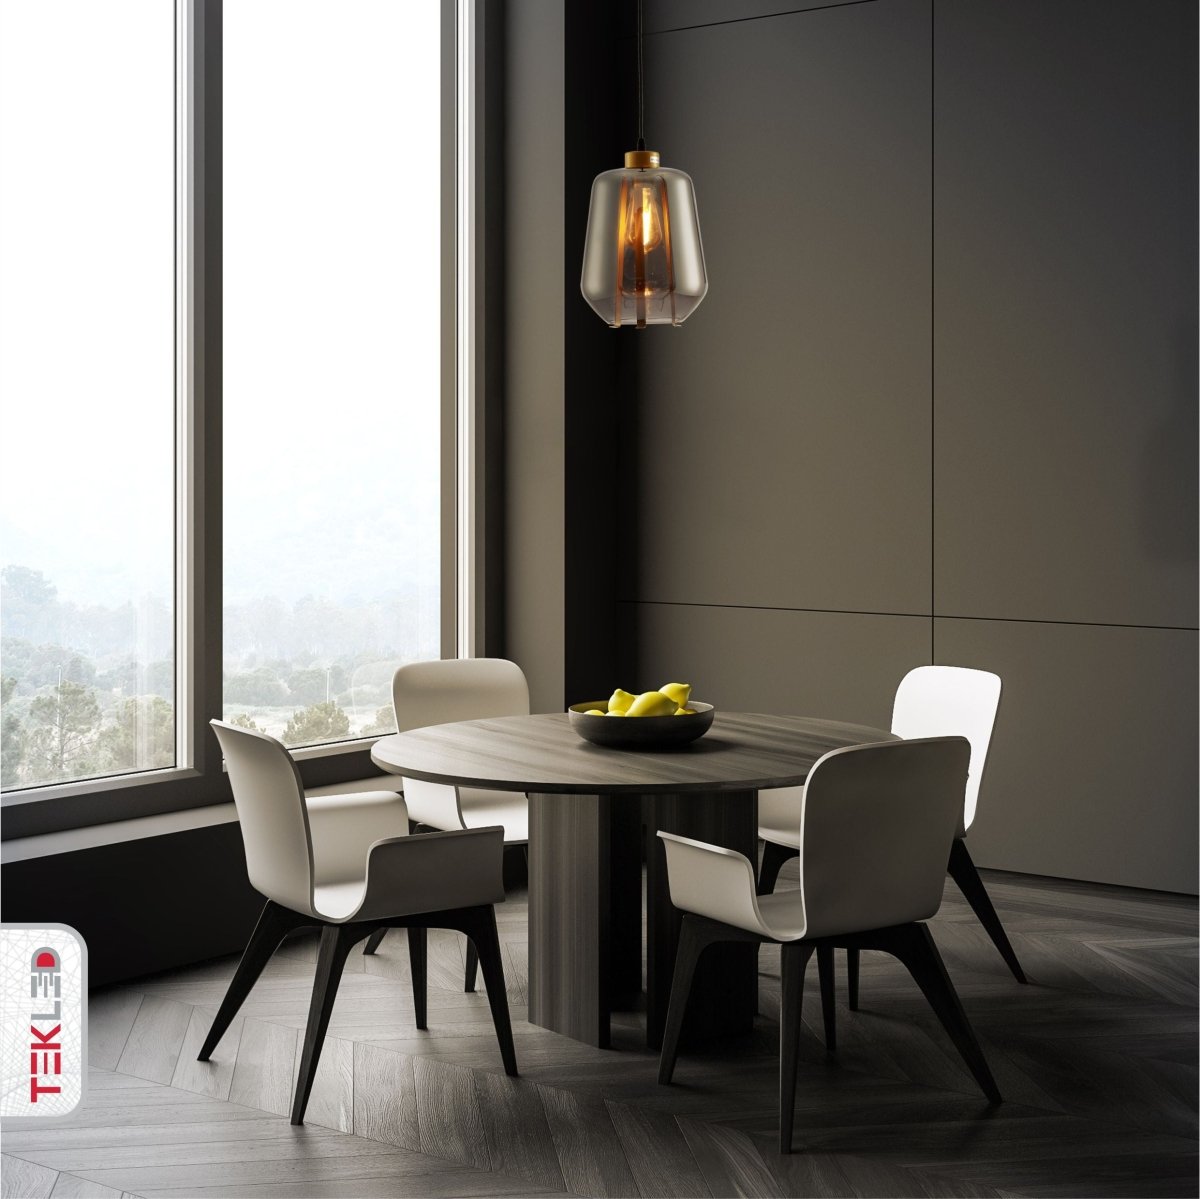 Indoor usage of Smoky Glass Schoolhouse Pendant Light with E27 Fitting | TEKLED 159-17348